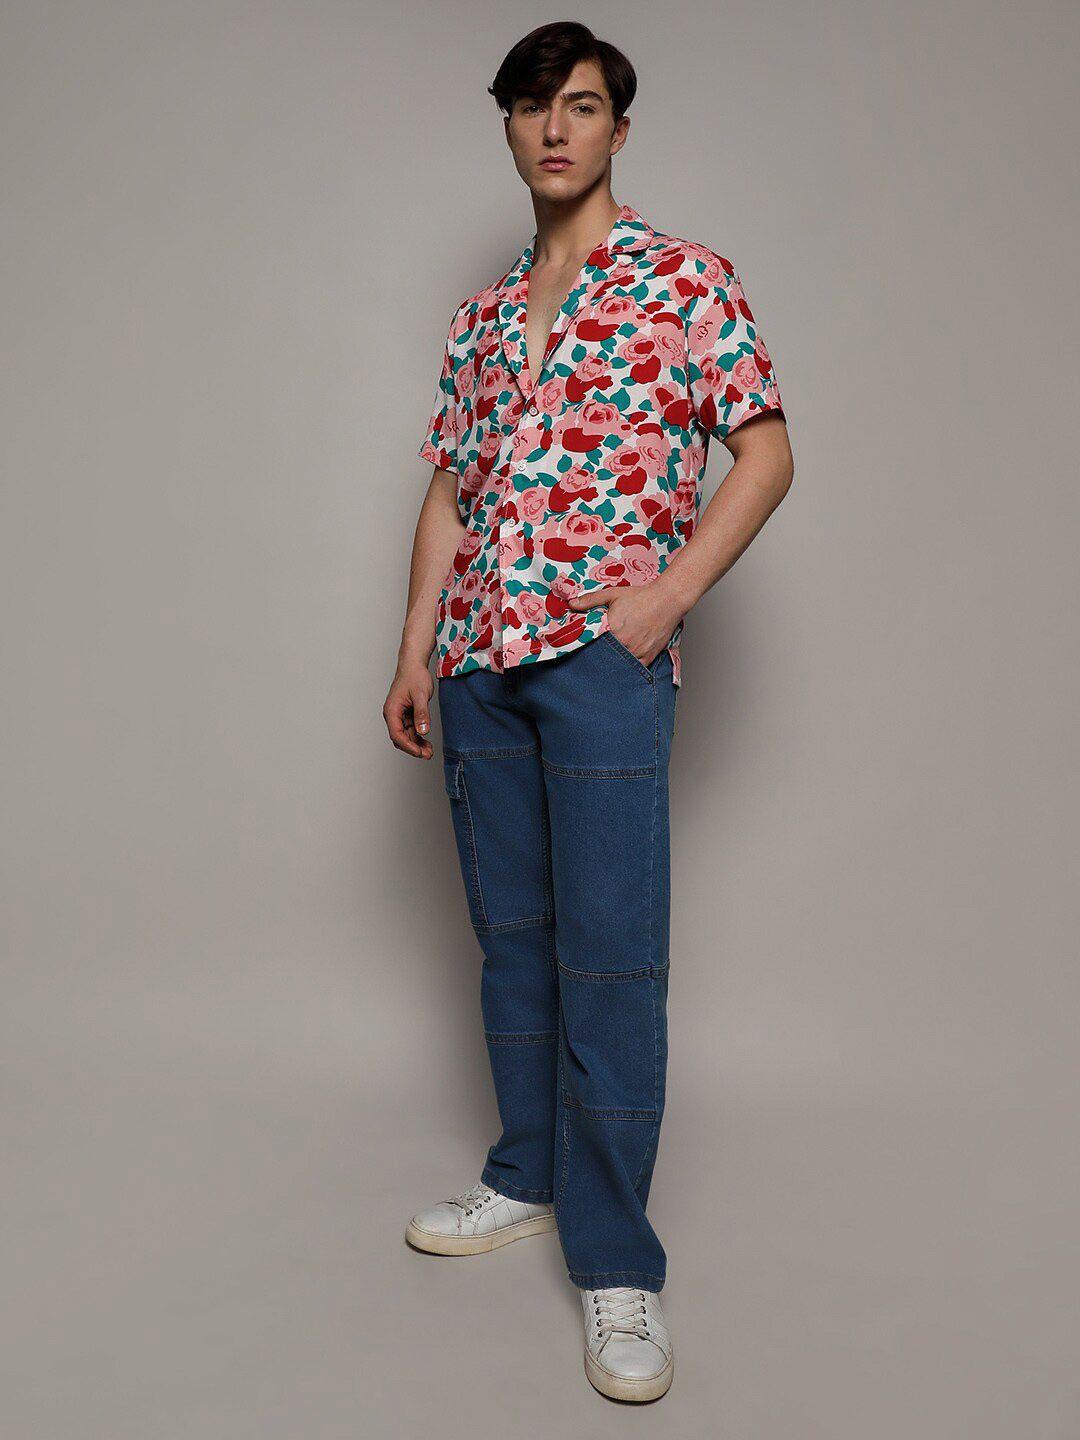 campus sutra white & red classic floral printed cuban collar casual shirt